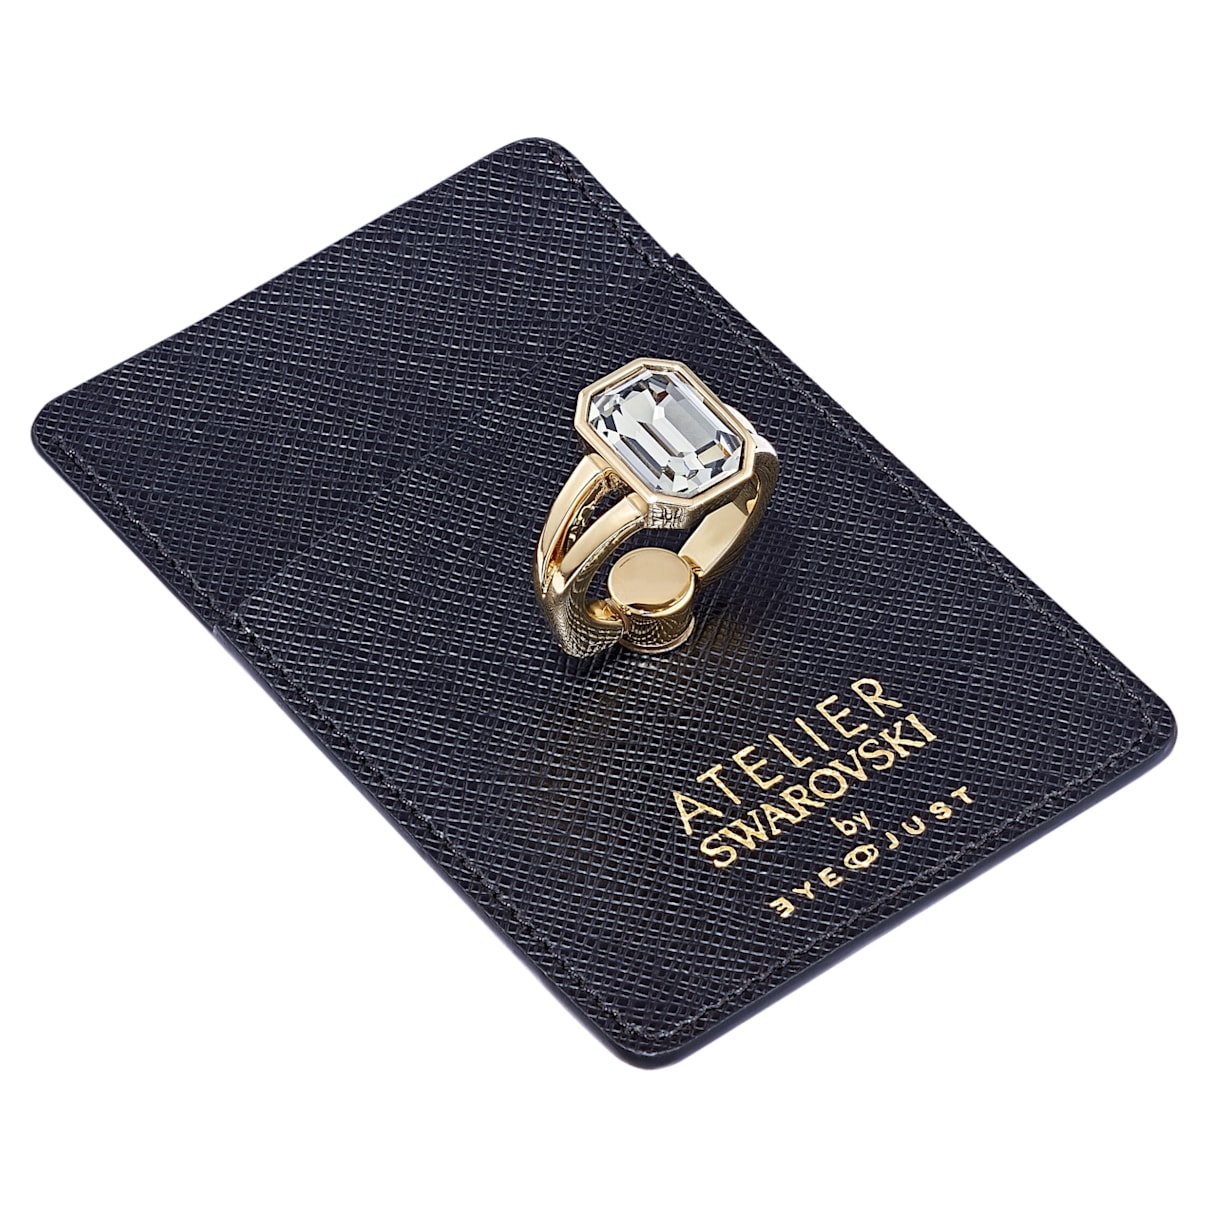 EyeJust Card and Ring Holder, Black, Gold-tone plated